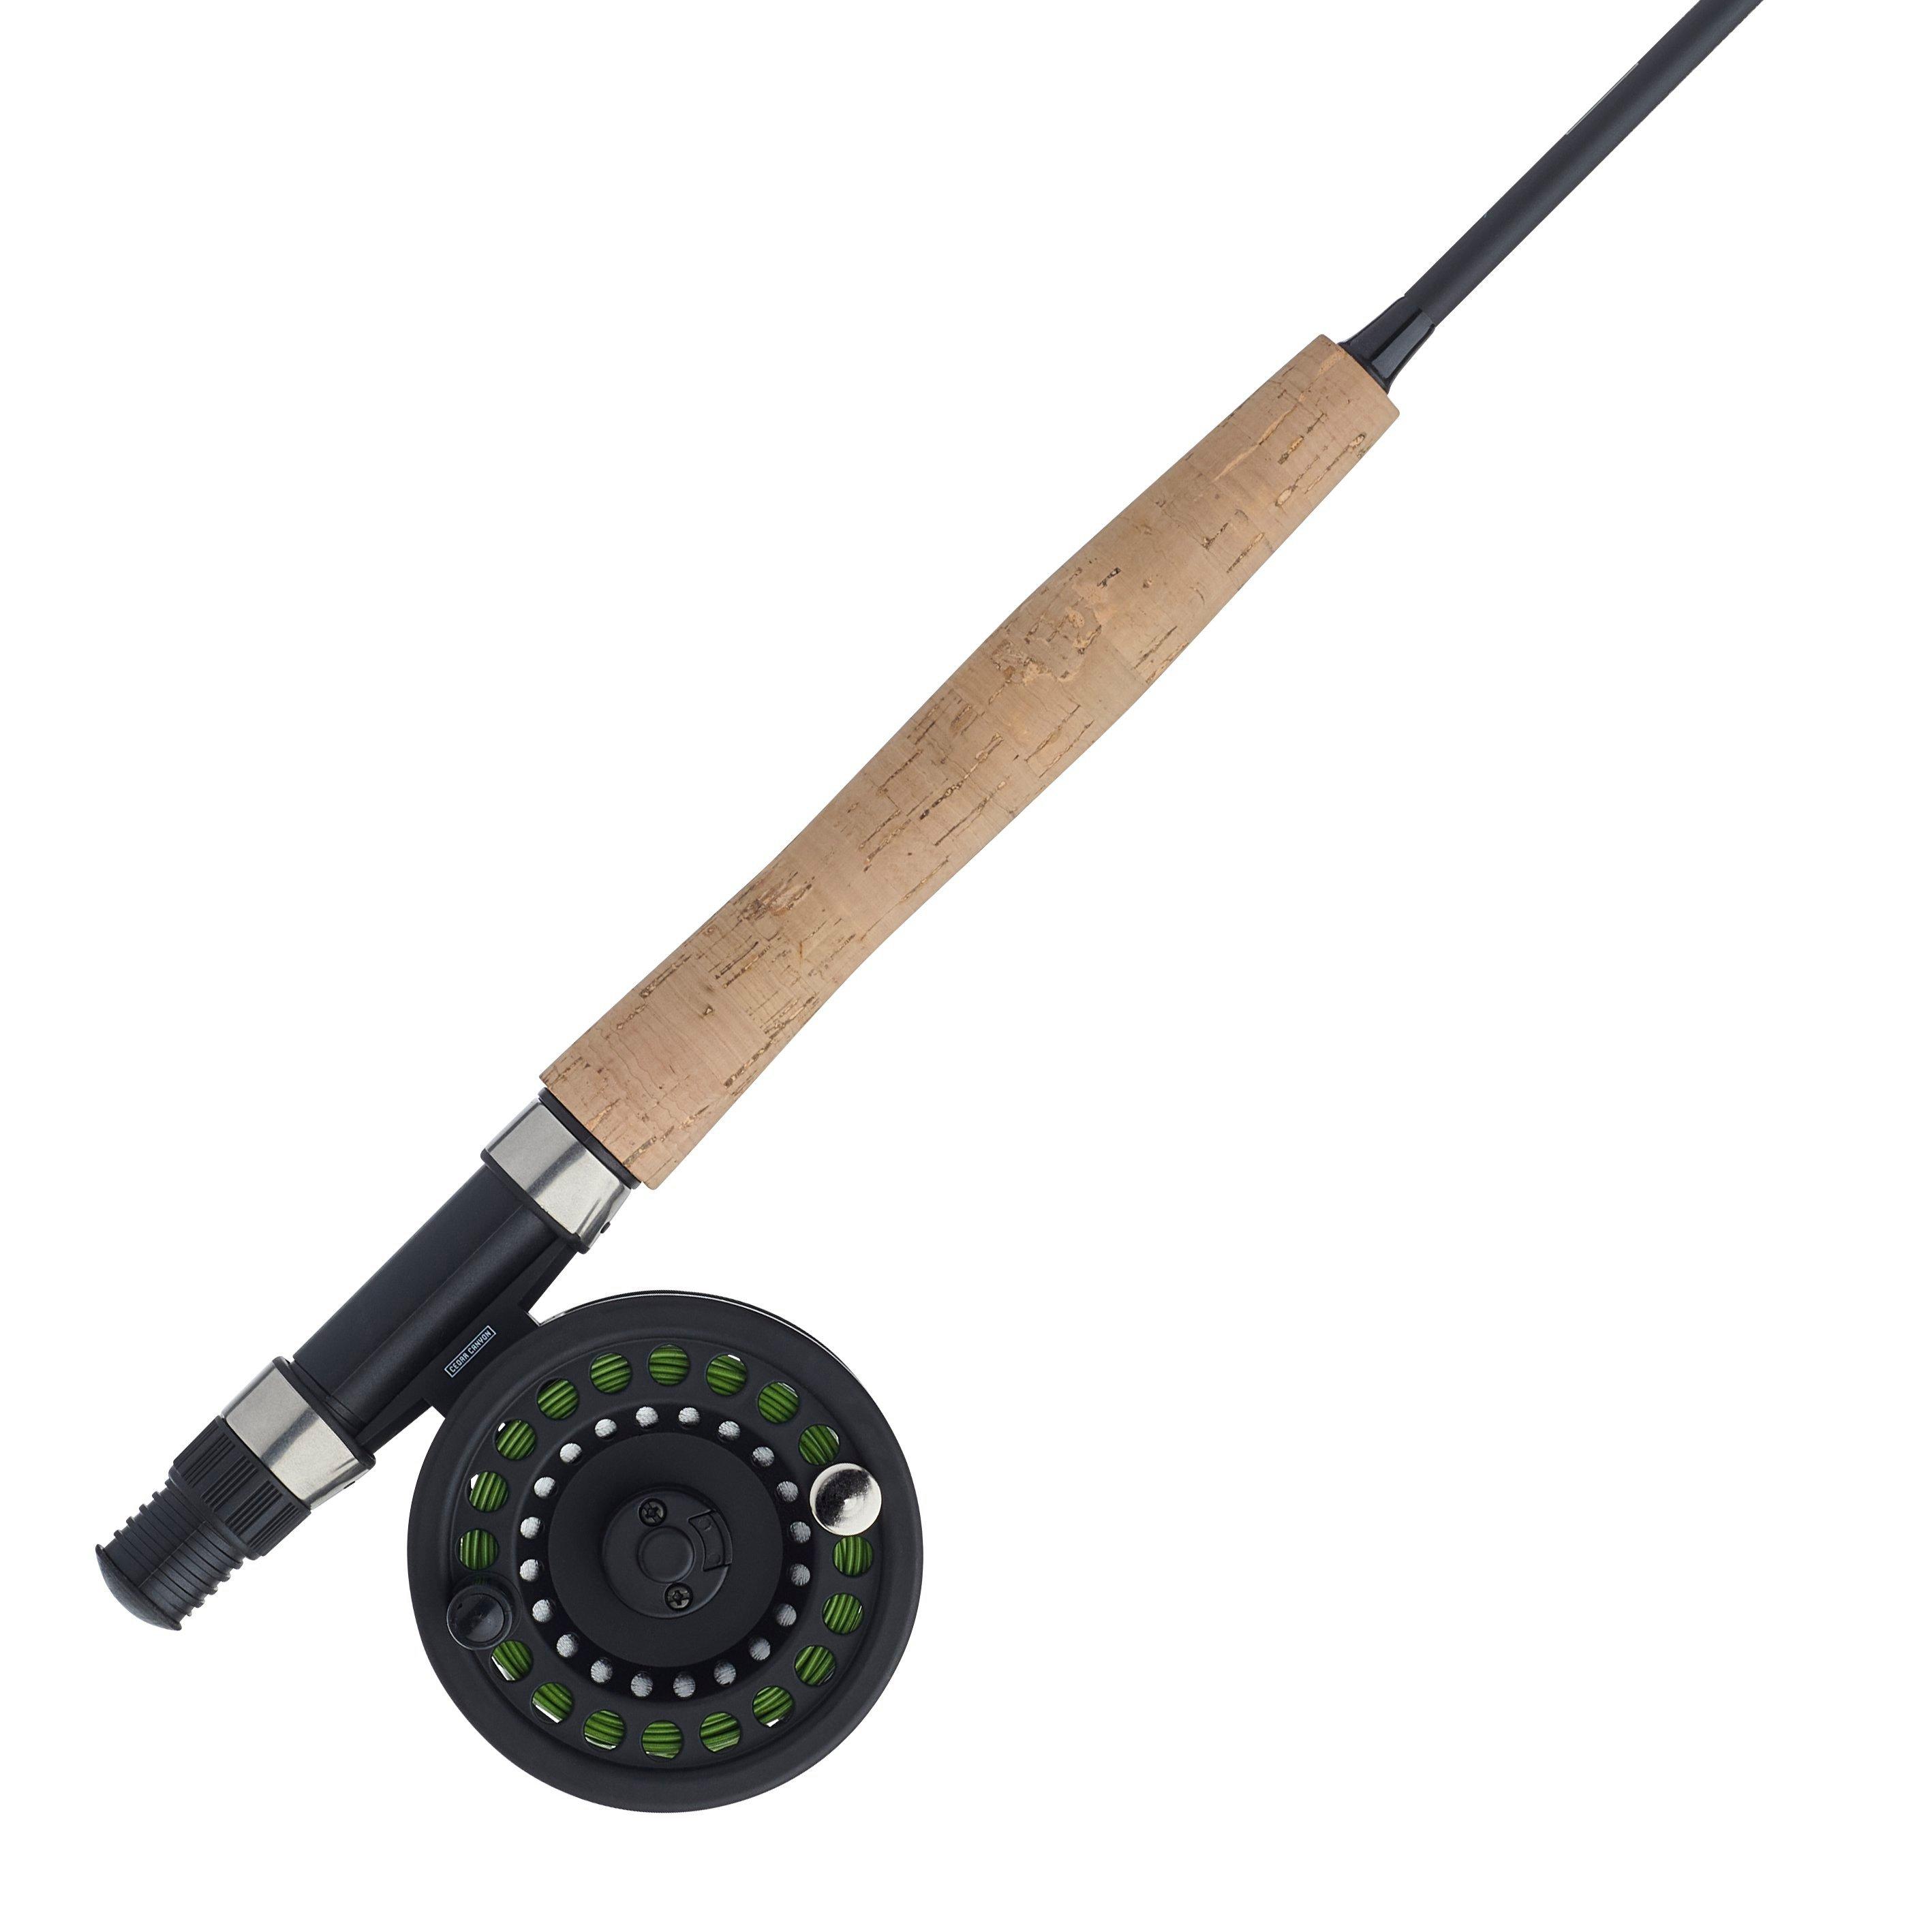 FLY FISHING POLE BY MARTIN 8' fly rod 